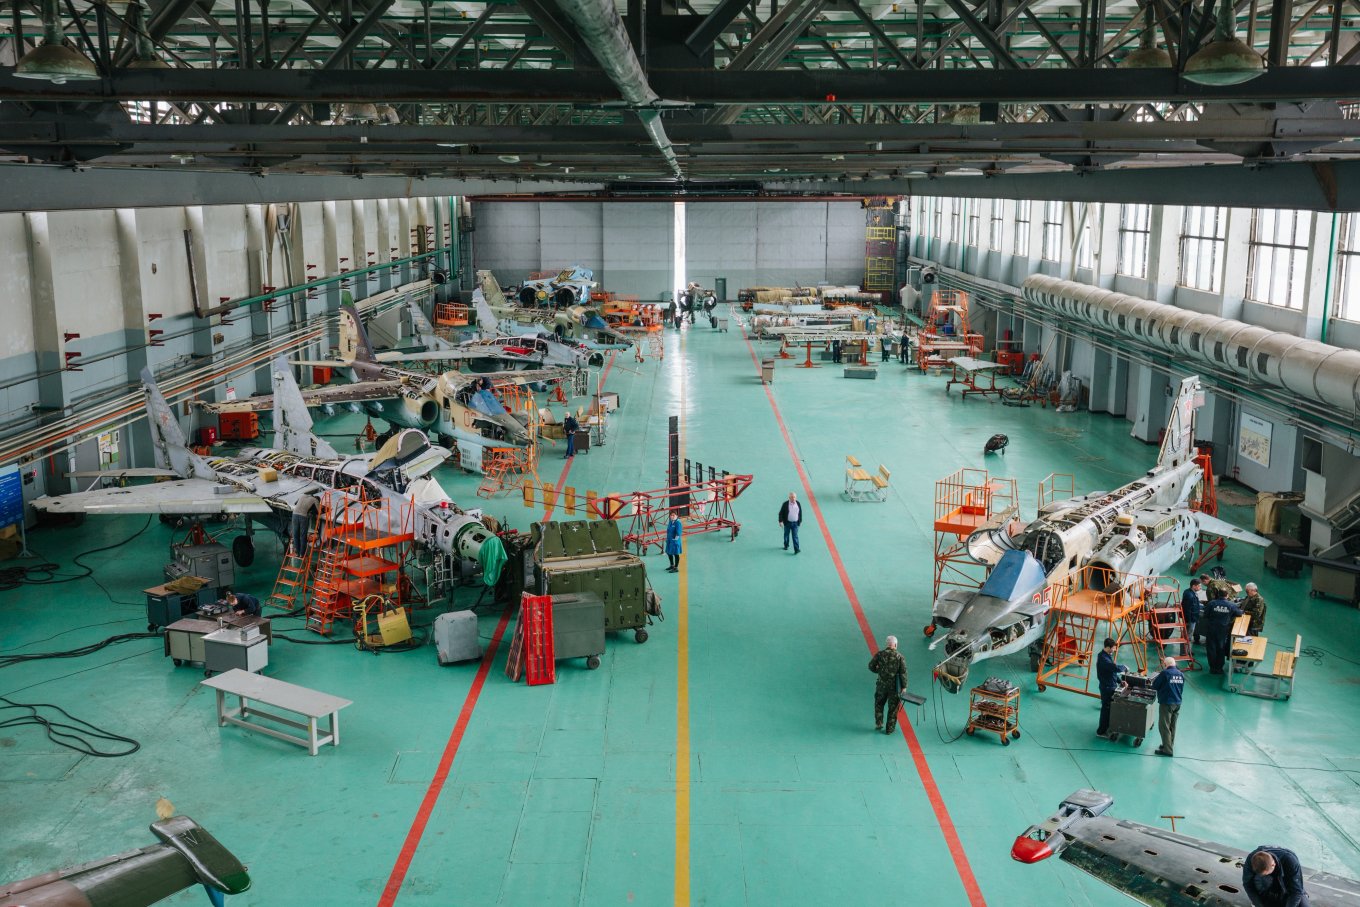 The 558th aircraft repair plant, Baranovichi, belarus, Specialists from belarusia Were Invited Repair Russian MiG-29 Aircraft, Defense Intelligence of Ukraine, Defense Express